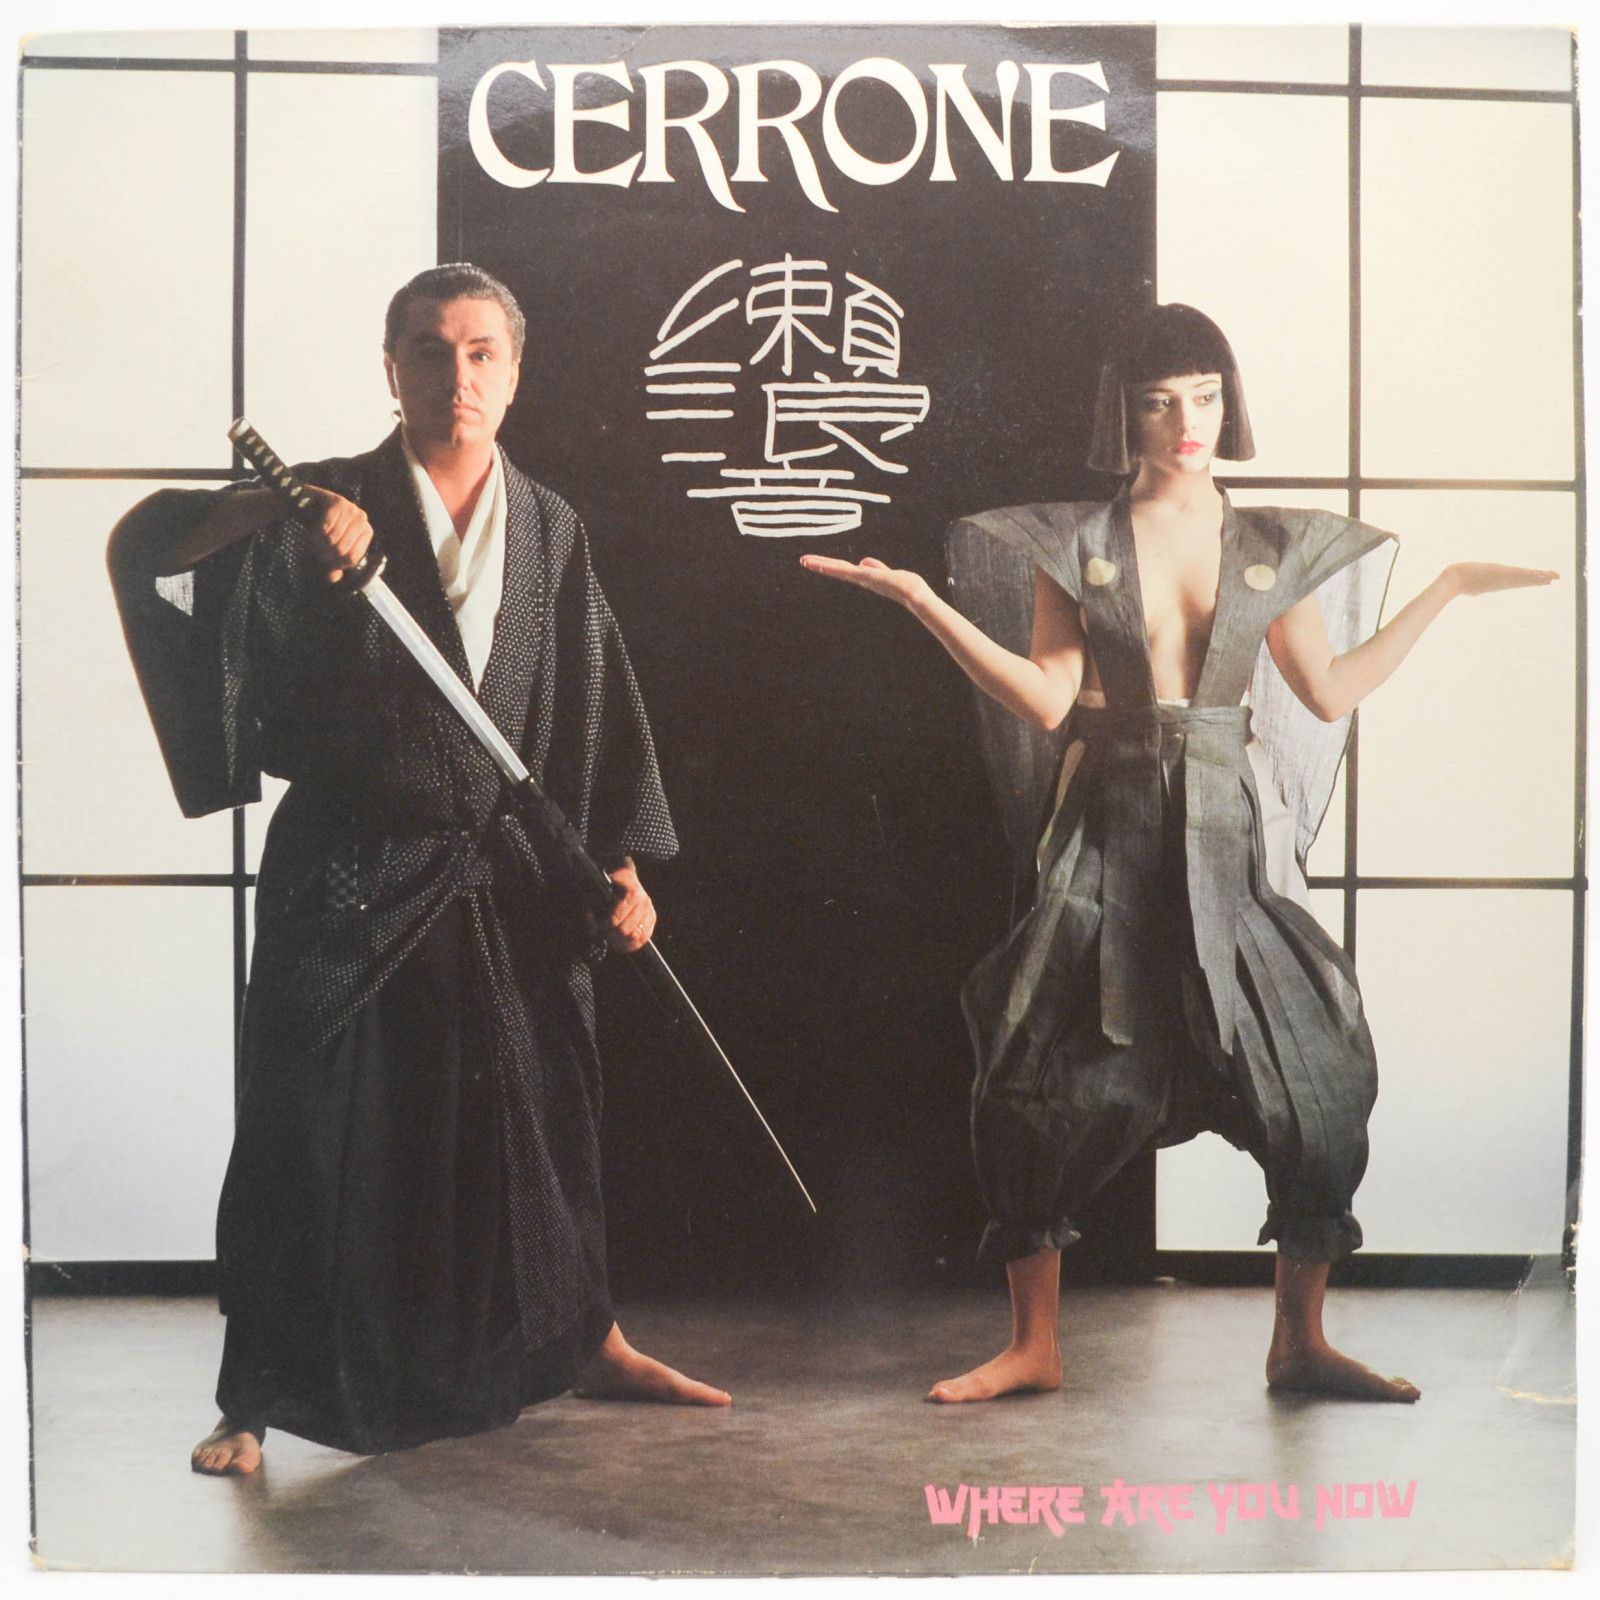 Cerrone — Where Are You Now (1-st, France), 1983